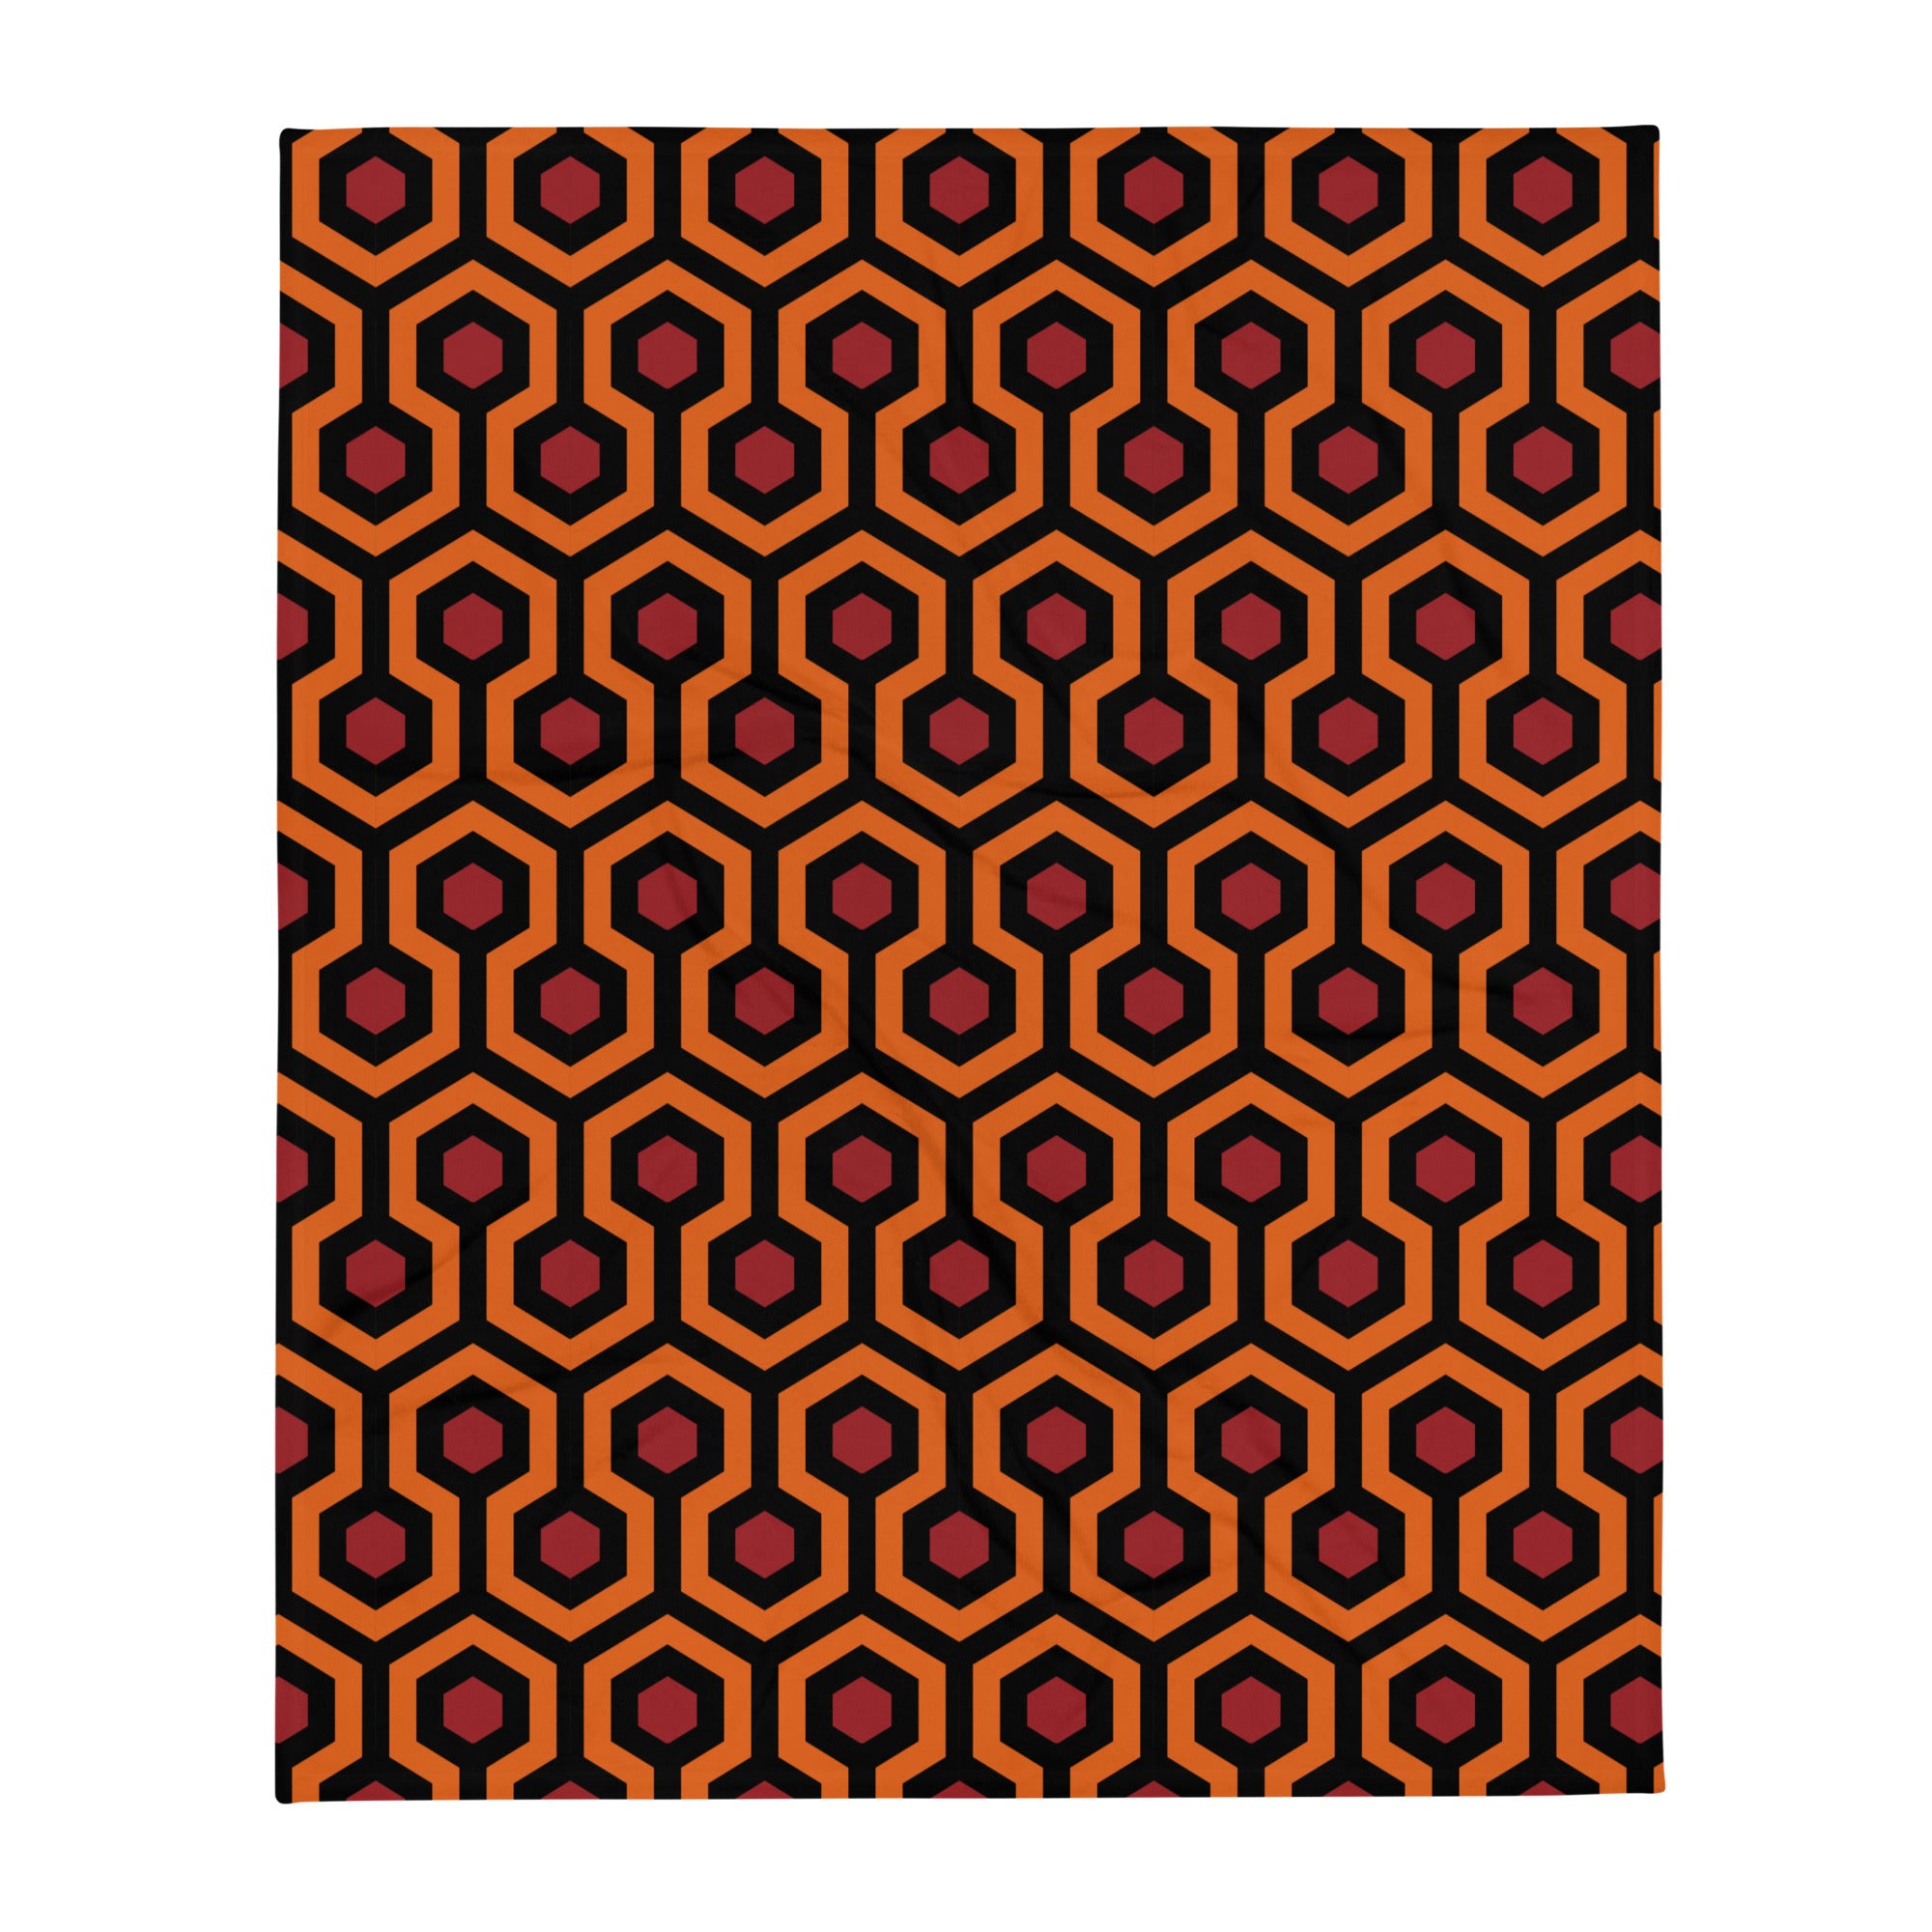 The Shining Carpet Patterned Throw Blanket